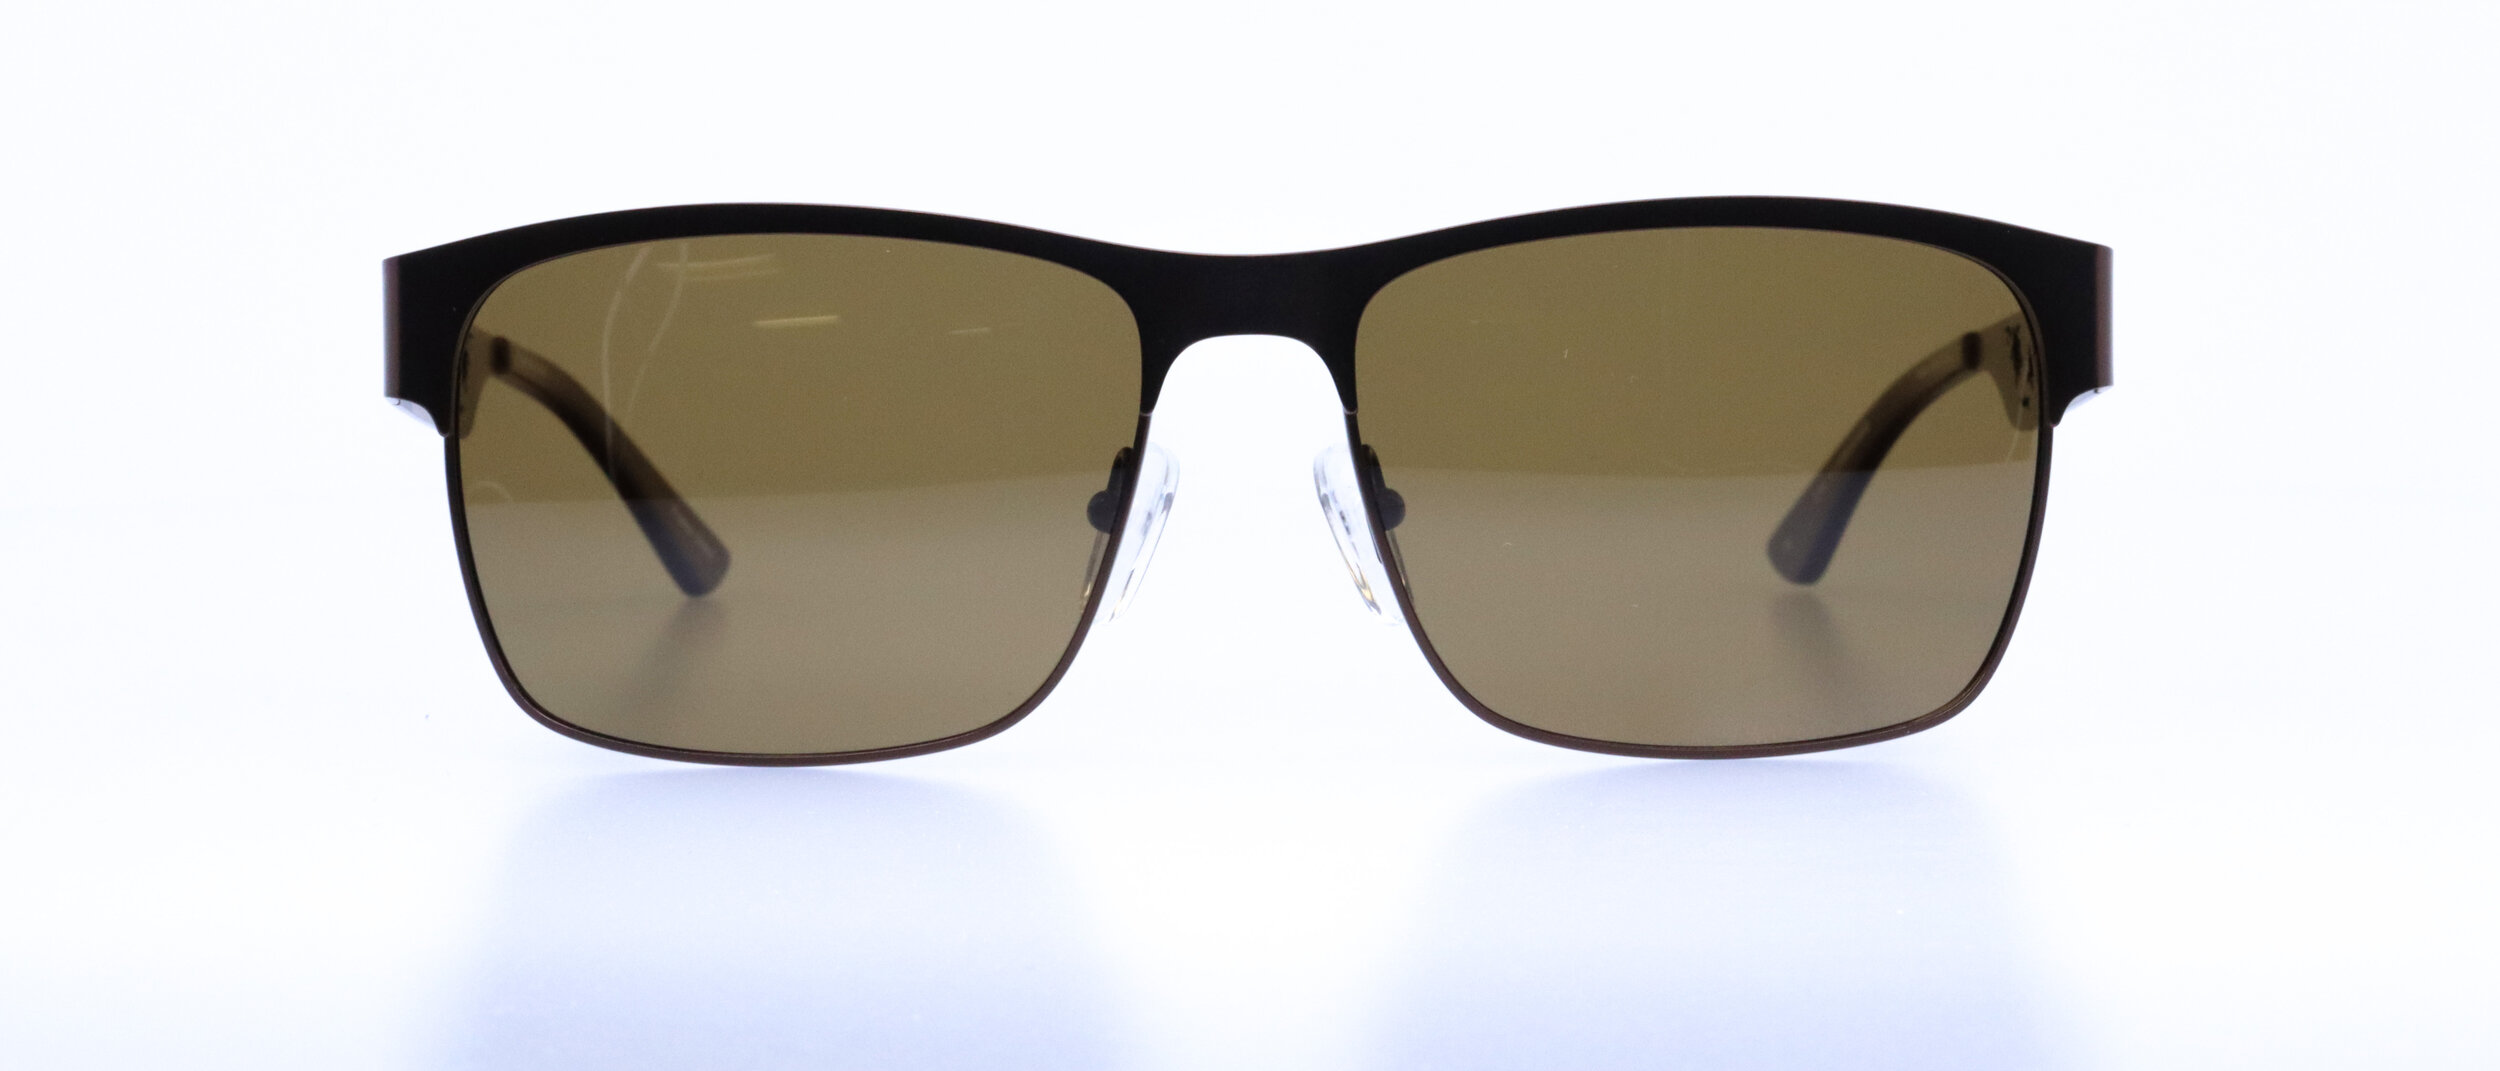  Turtle 2 by Virgil "Smoker" Marchand: 58-16-140, Available in Gunmetal or Brown (Polarized Sun) 